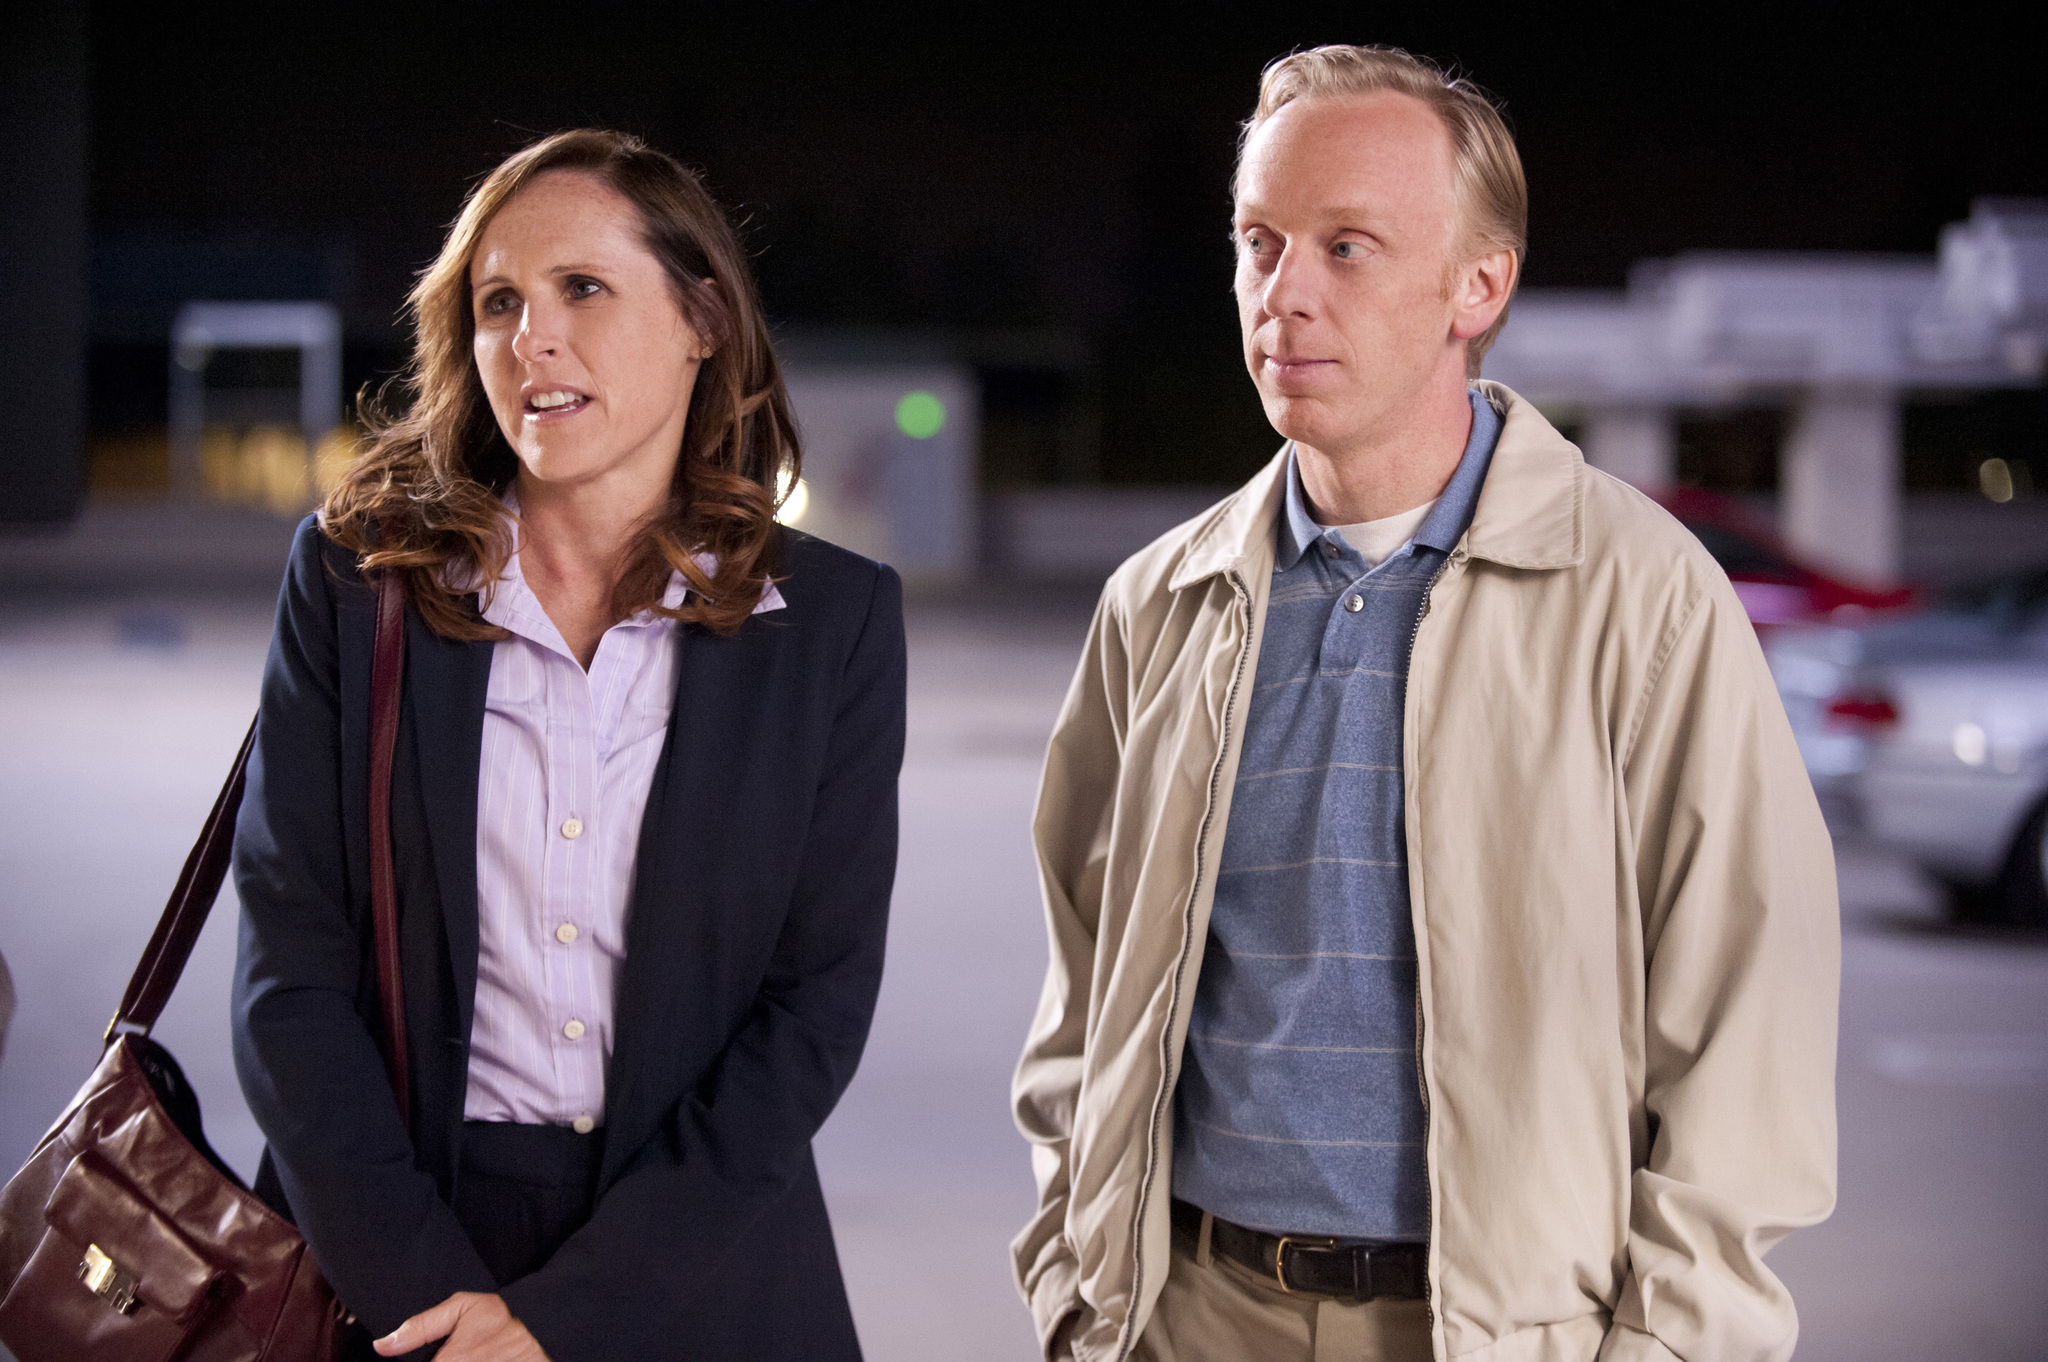 Still of Molly Shannon and Mike White in Enlightened (2011)